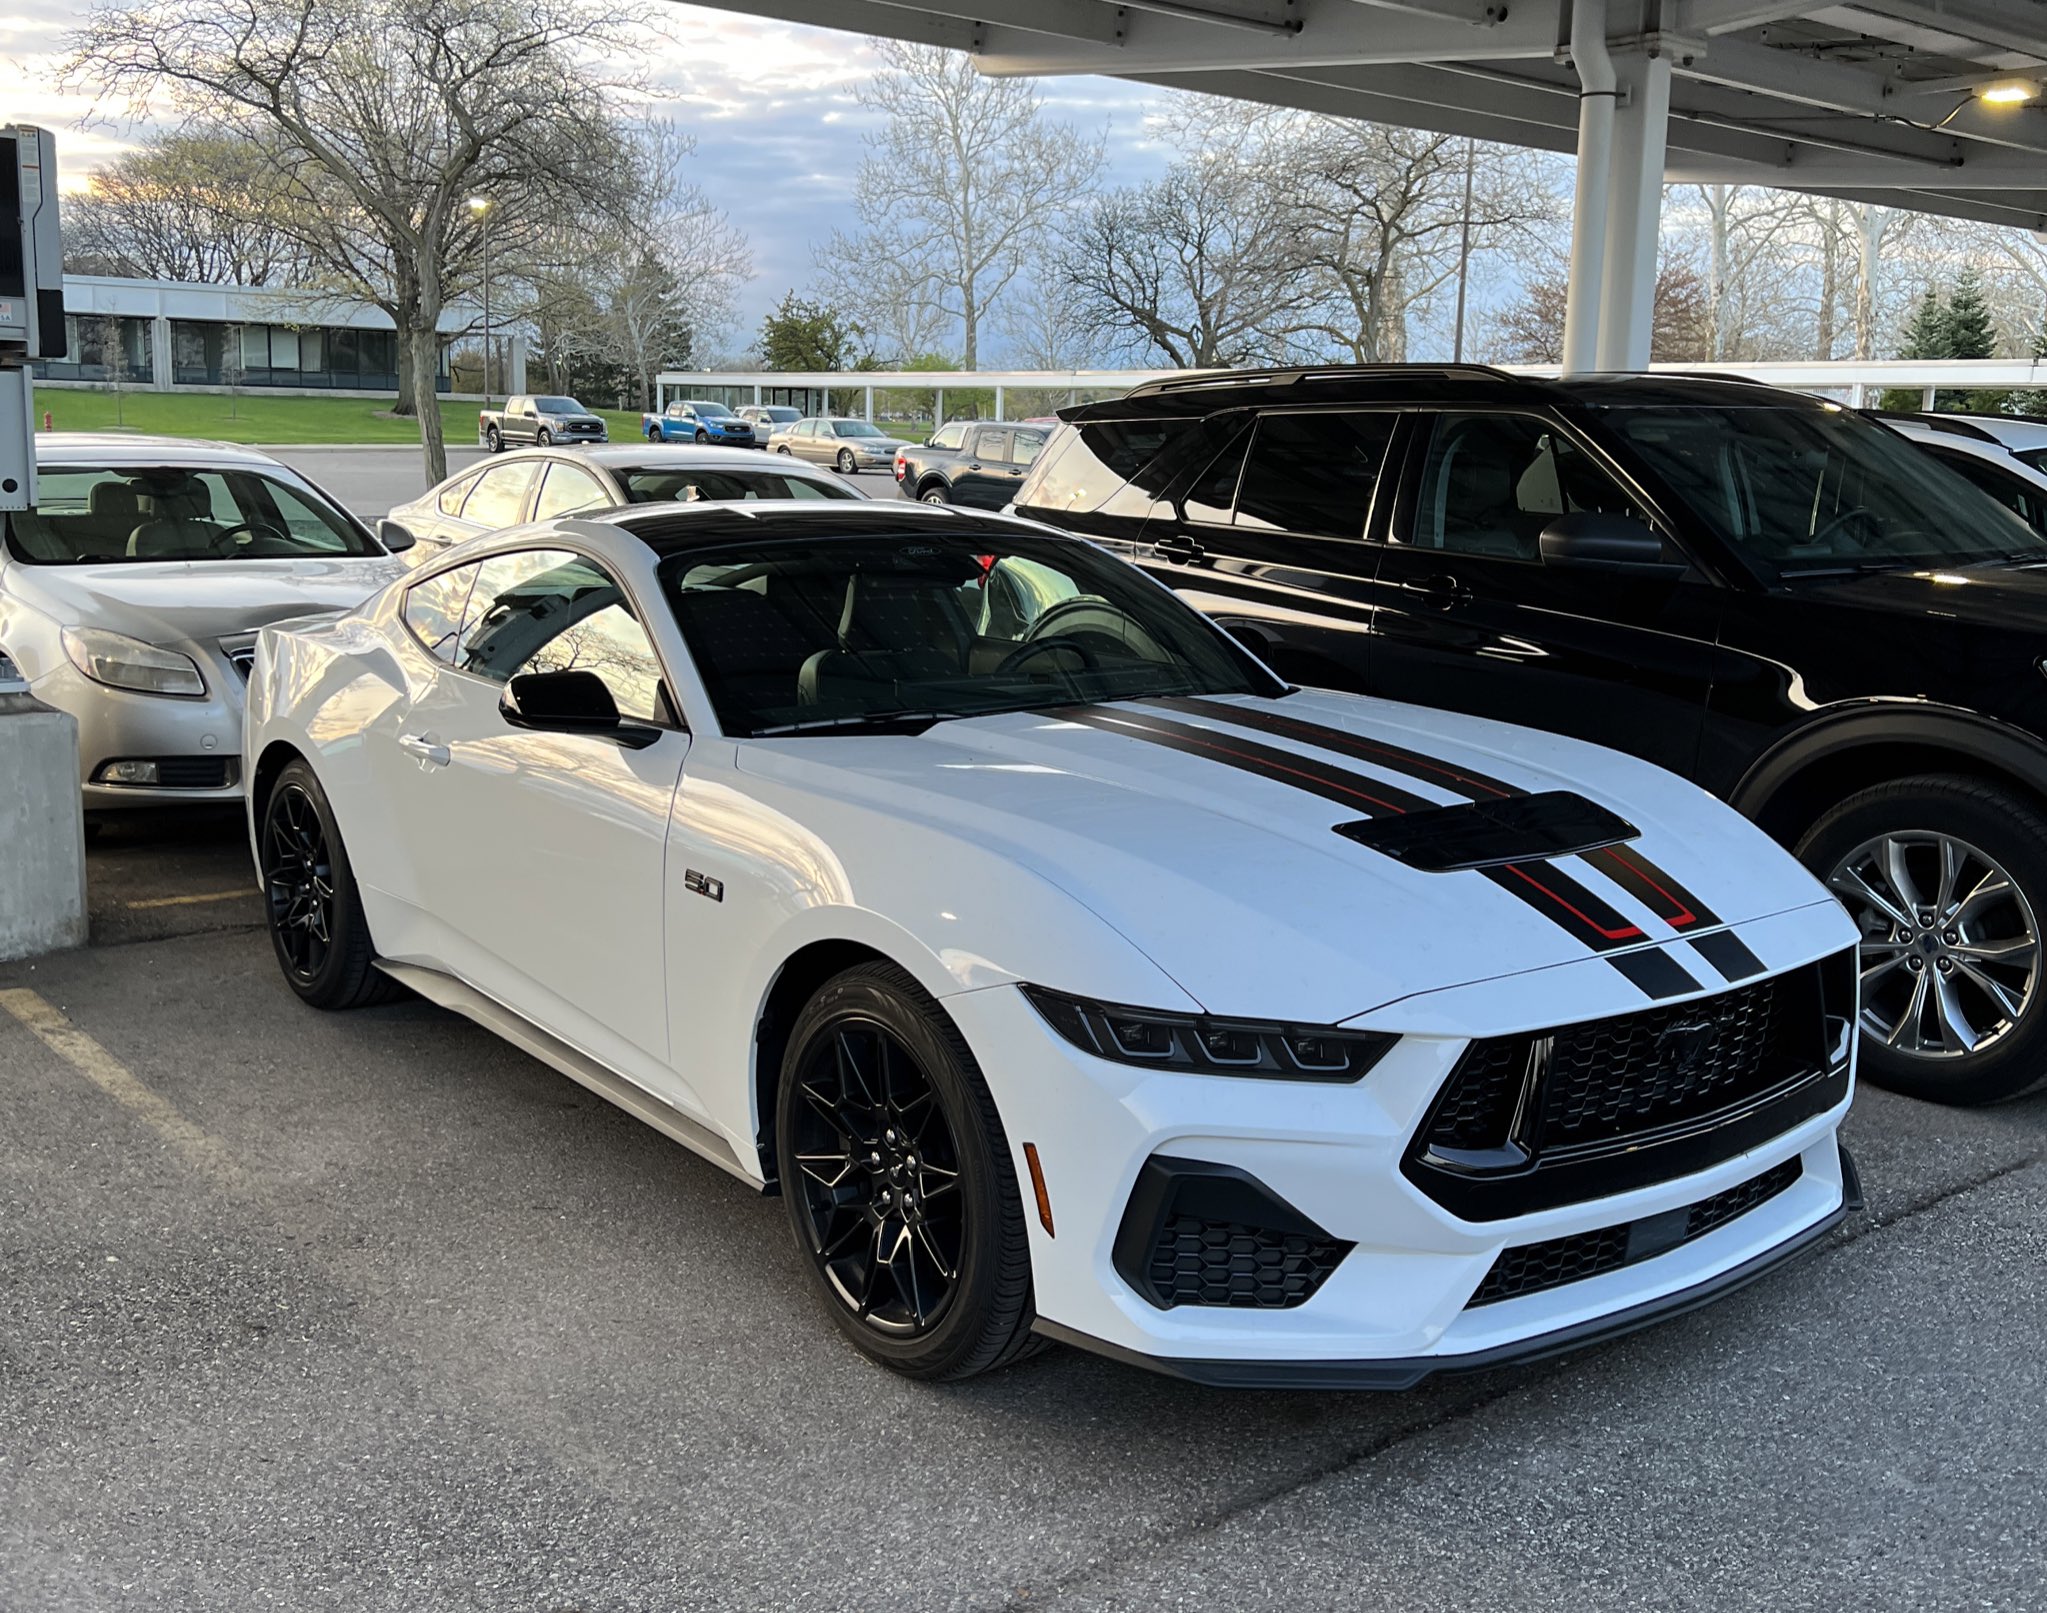 S650 Mustang Official OXFORD WHITE Mustang S650 Thread 20230424_075256